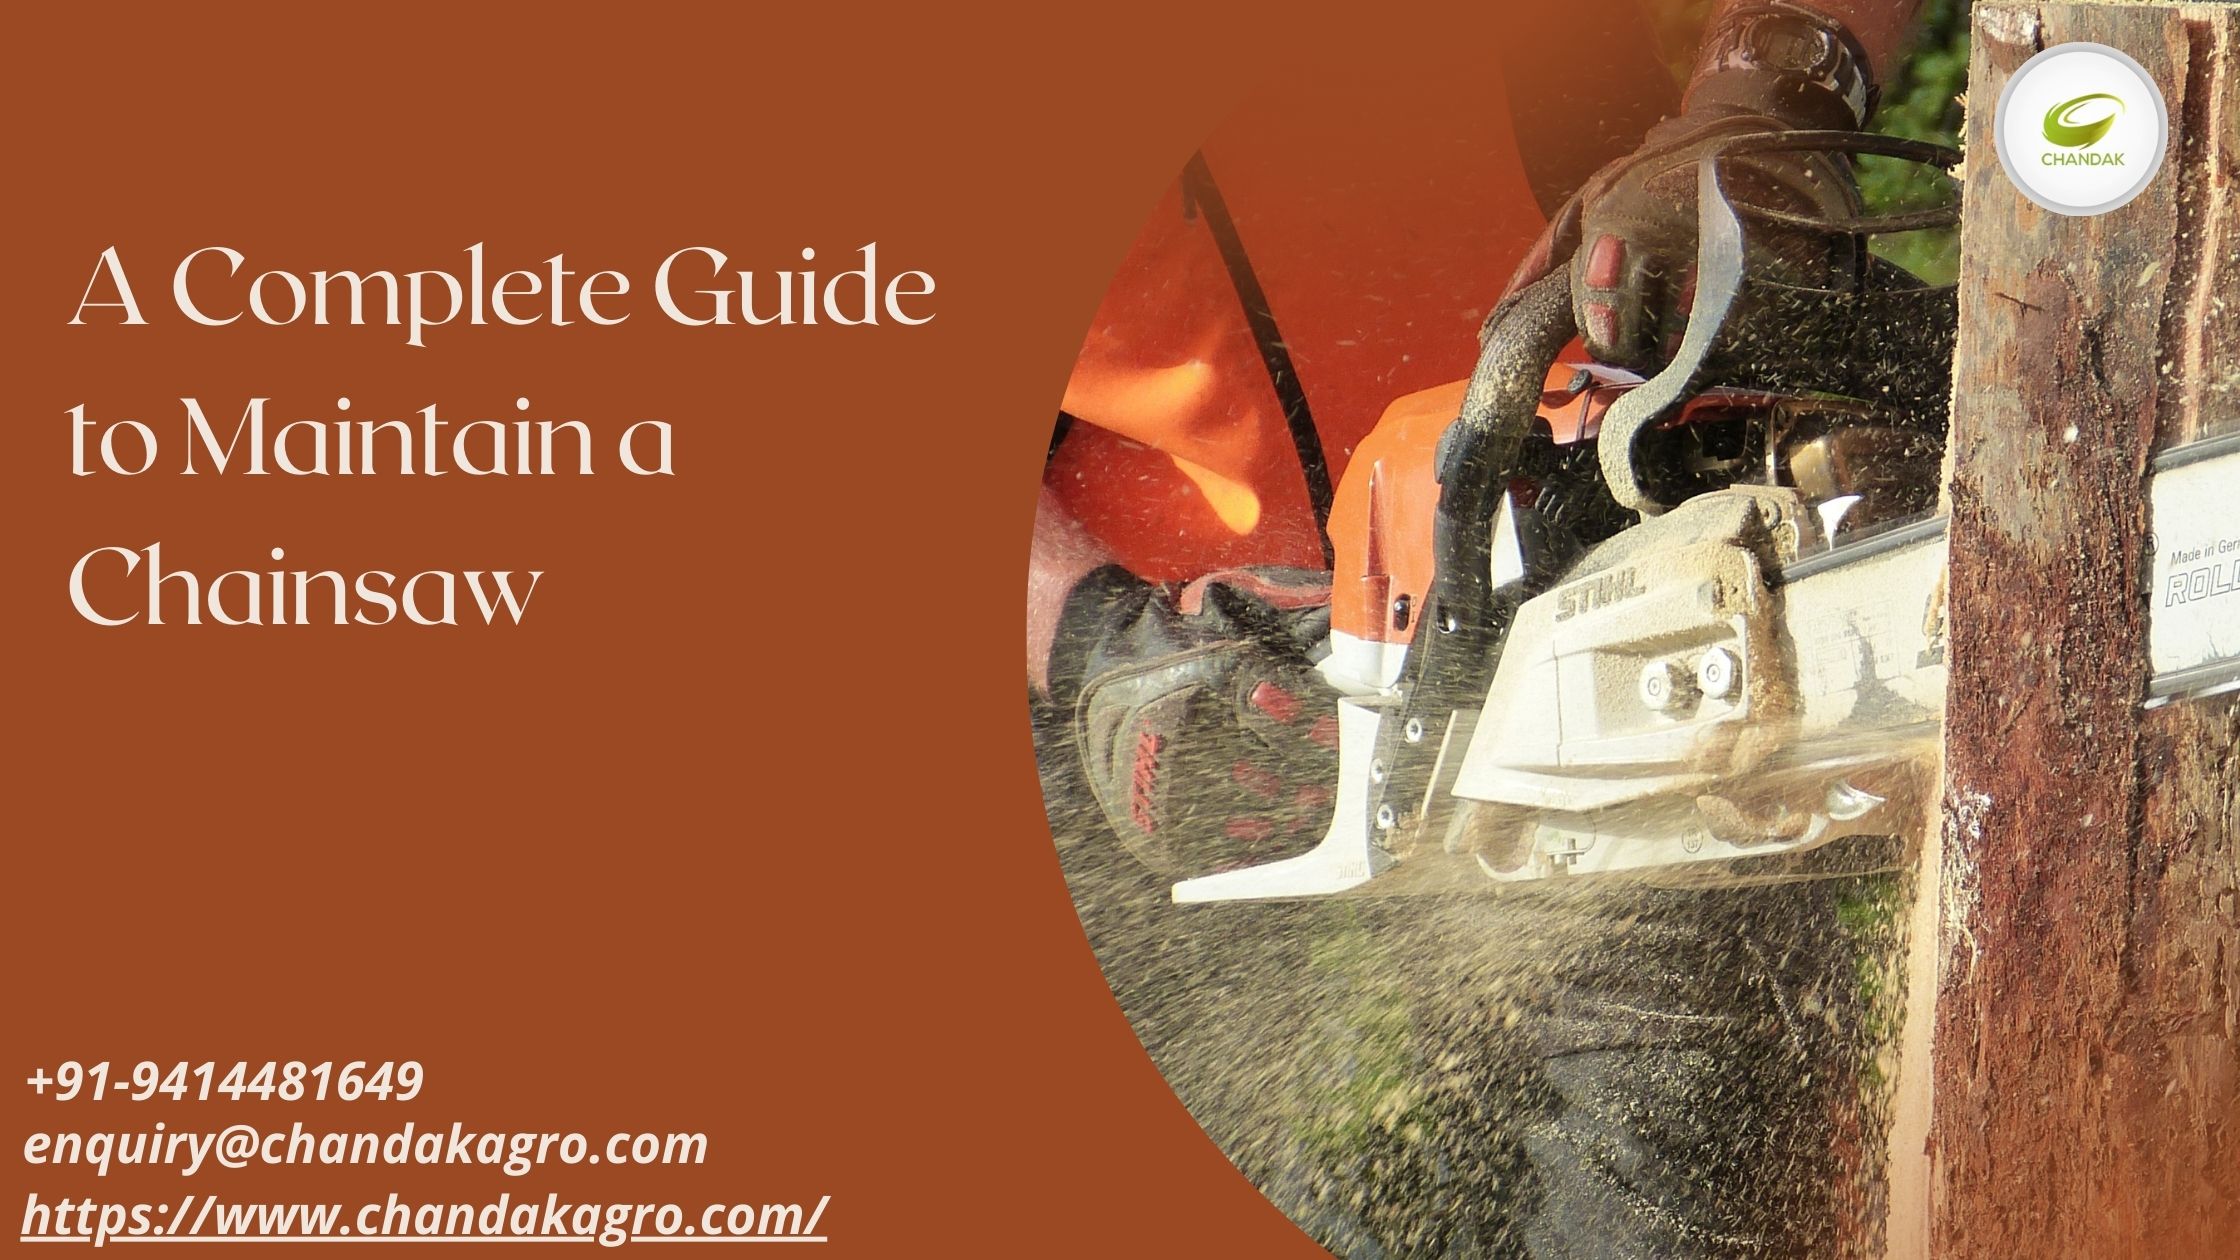 A Complete Guide to Maintain a Chainsaw-ff3ae937